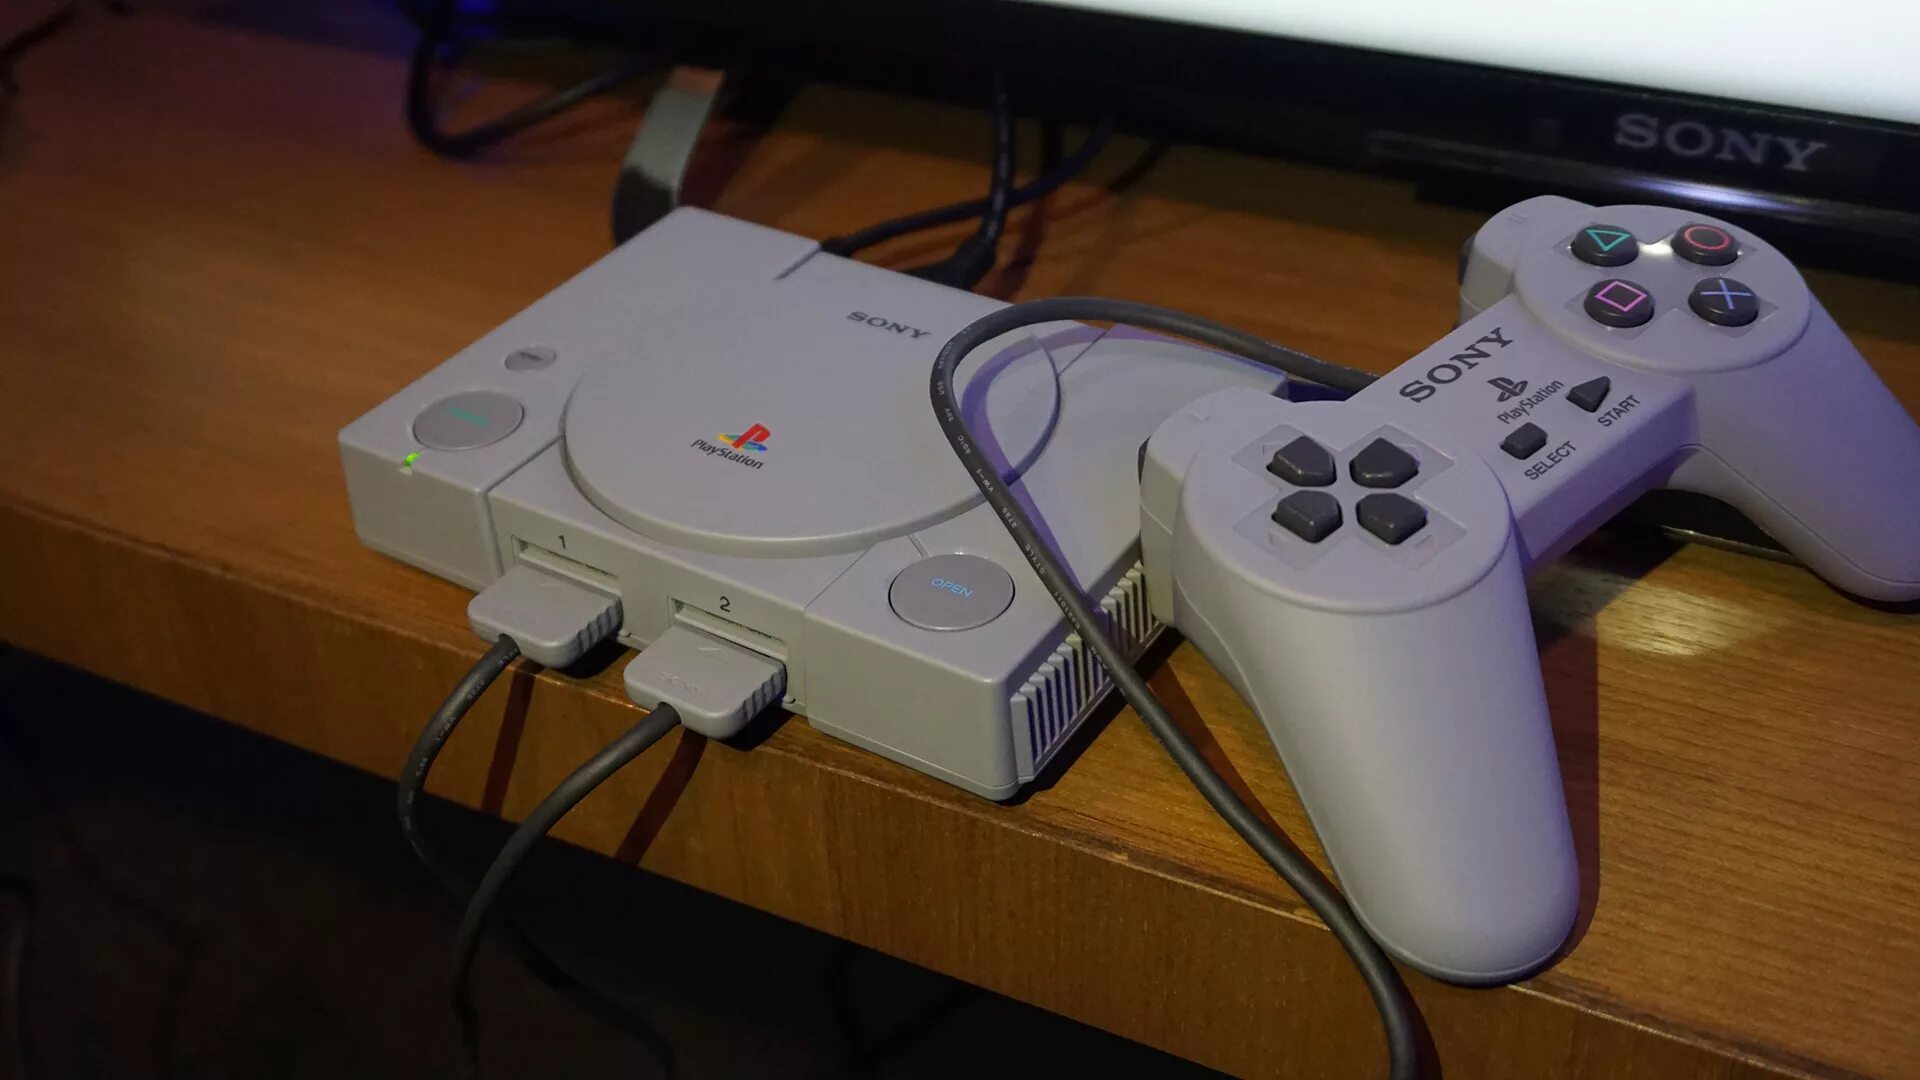 Sony ps1 Classic. Sony PLAYSTATION 1 Classic. Ps1 Classic Mini. Sony PLAYSTATION 1 Classic Mini.